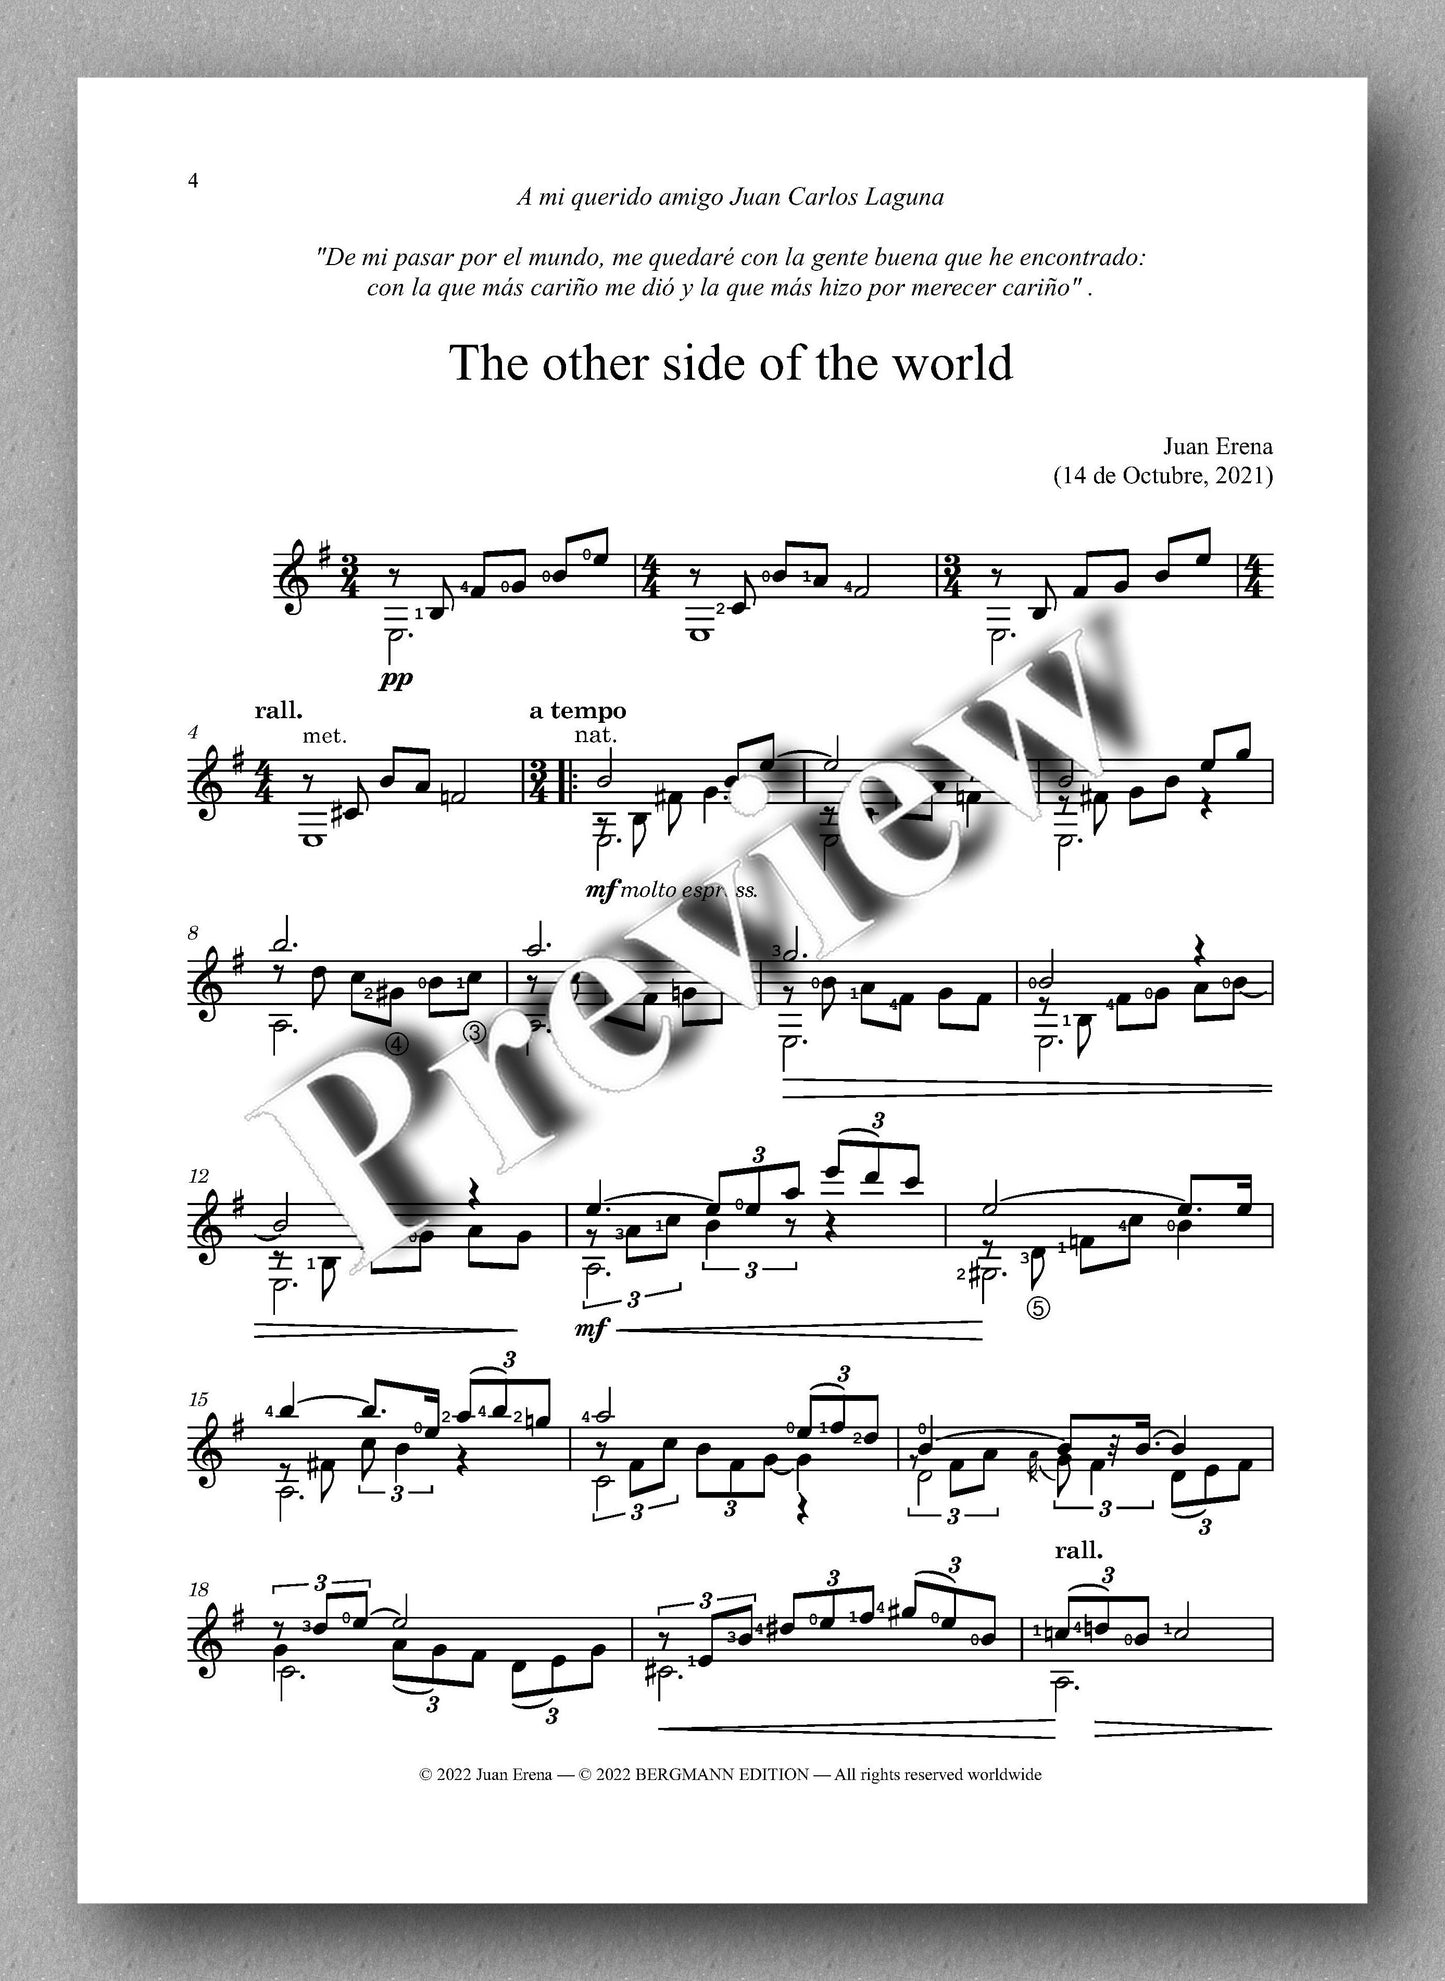 Erena, The Other Side of the World - music score 1